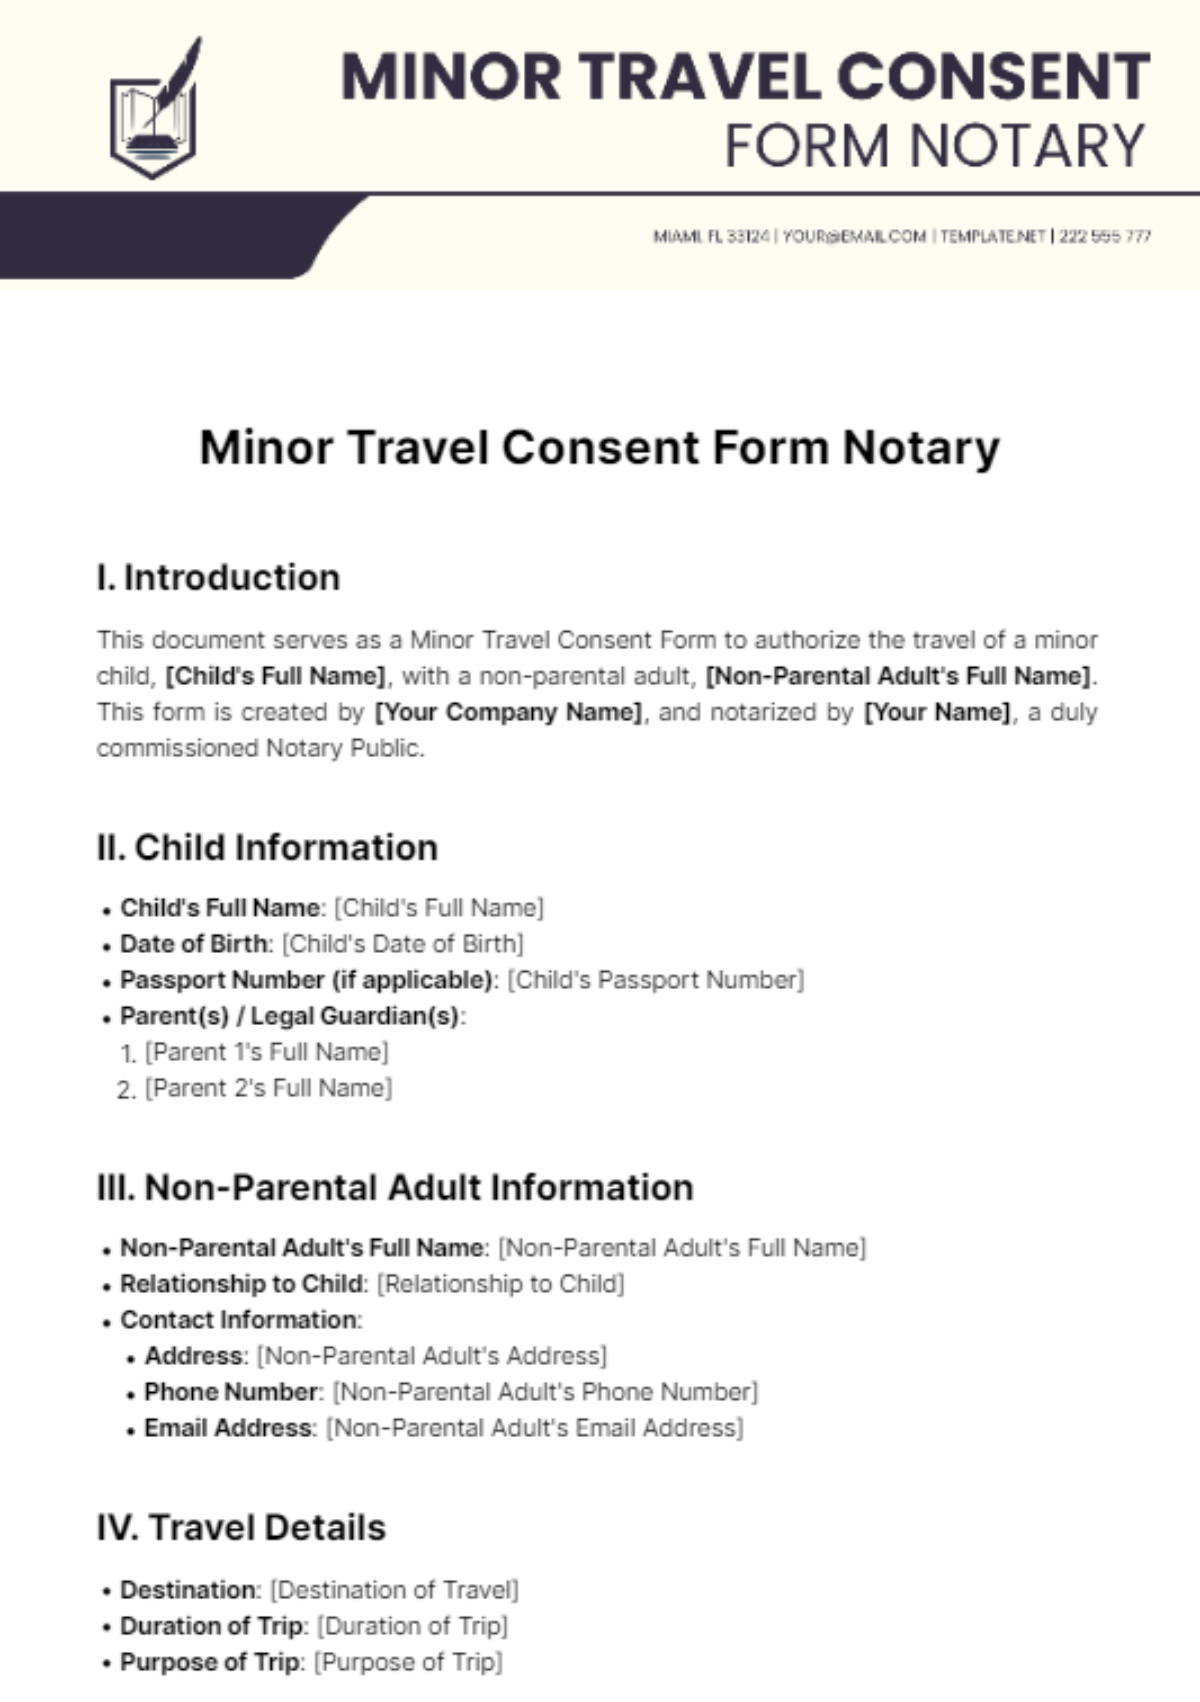 Minor Travel Consent Form Notary Template